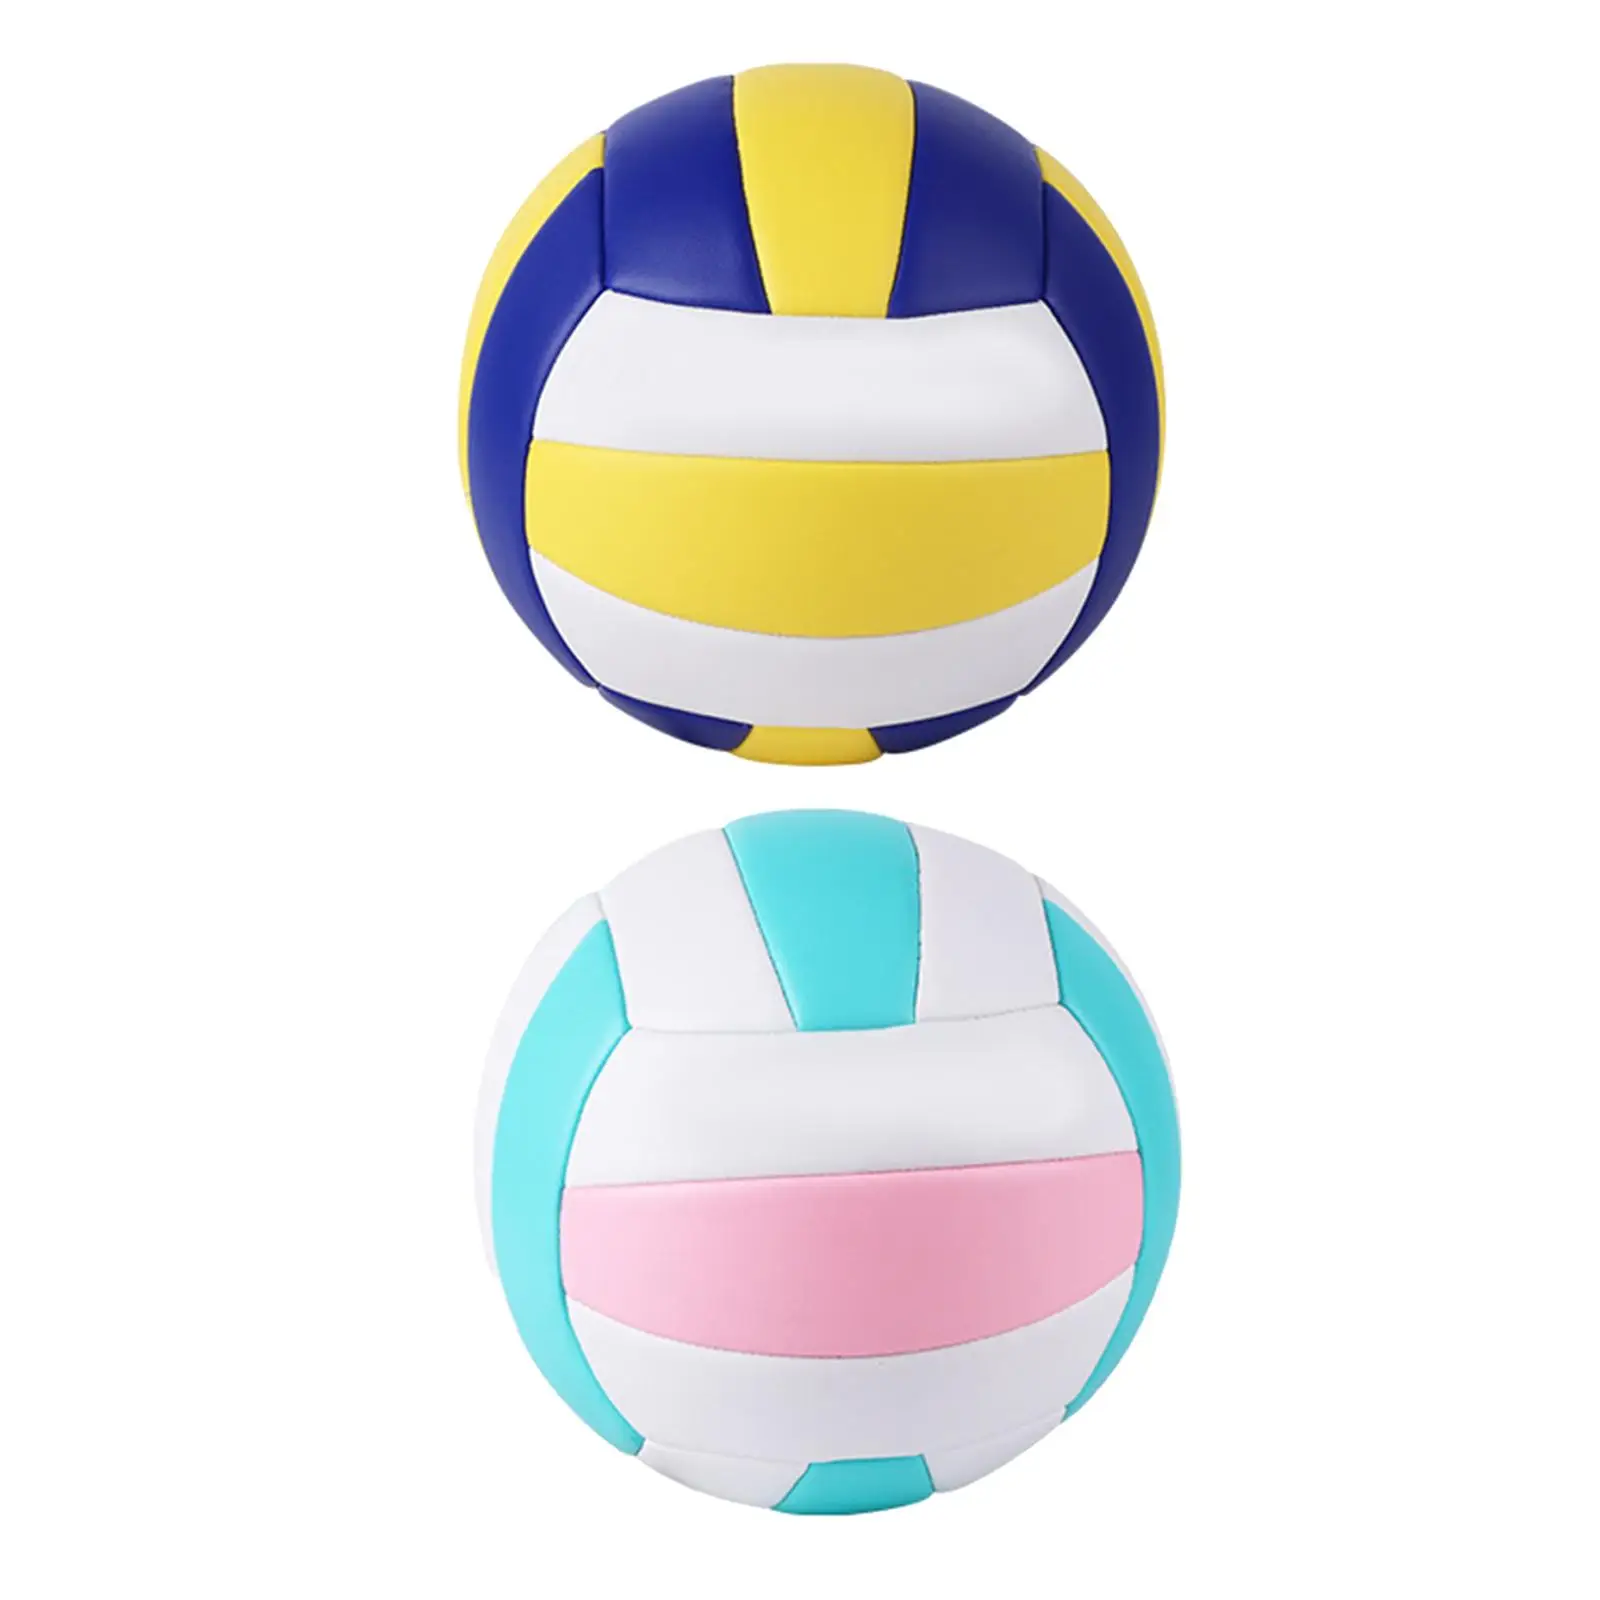 Standard Size 5 Indoor Volleyball Soft Outdoor Ball w/ Inflator Beach Pool Gym  Teenager